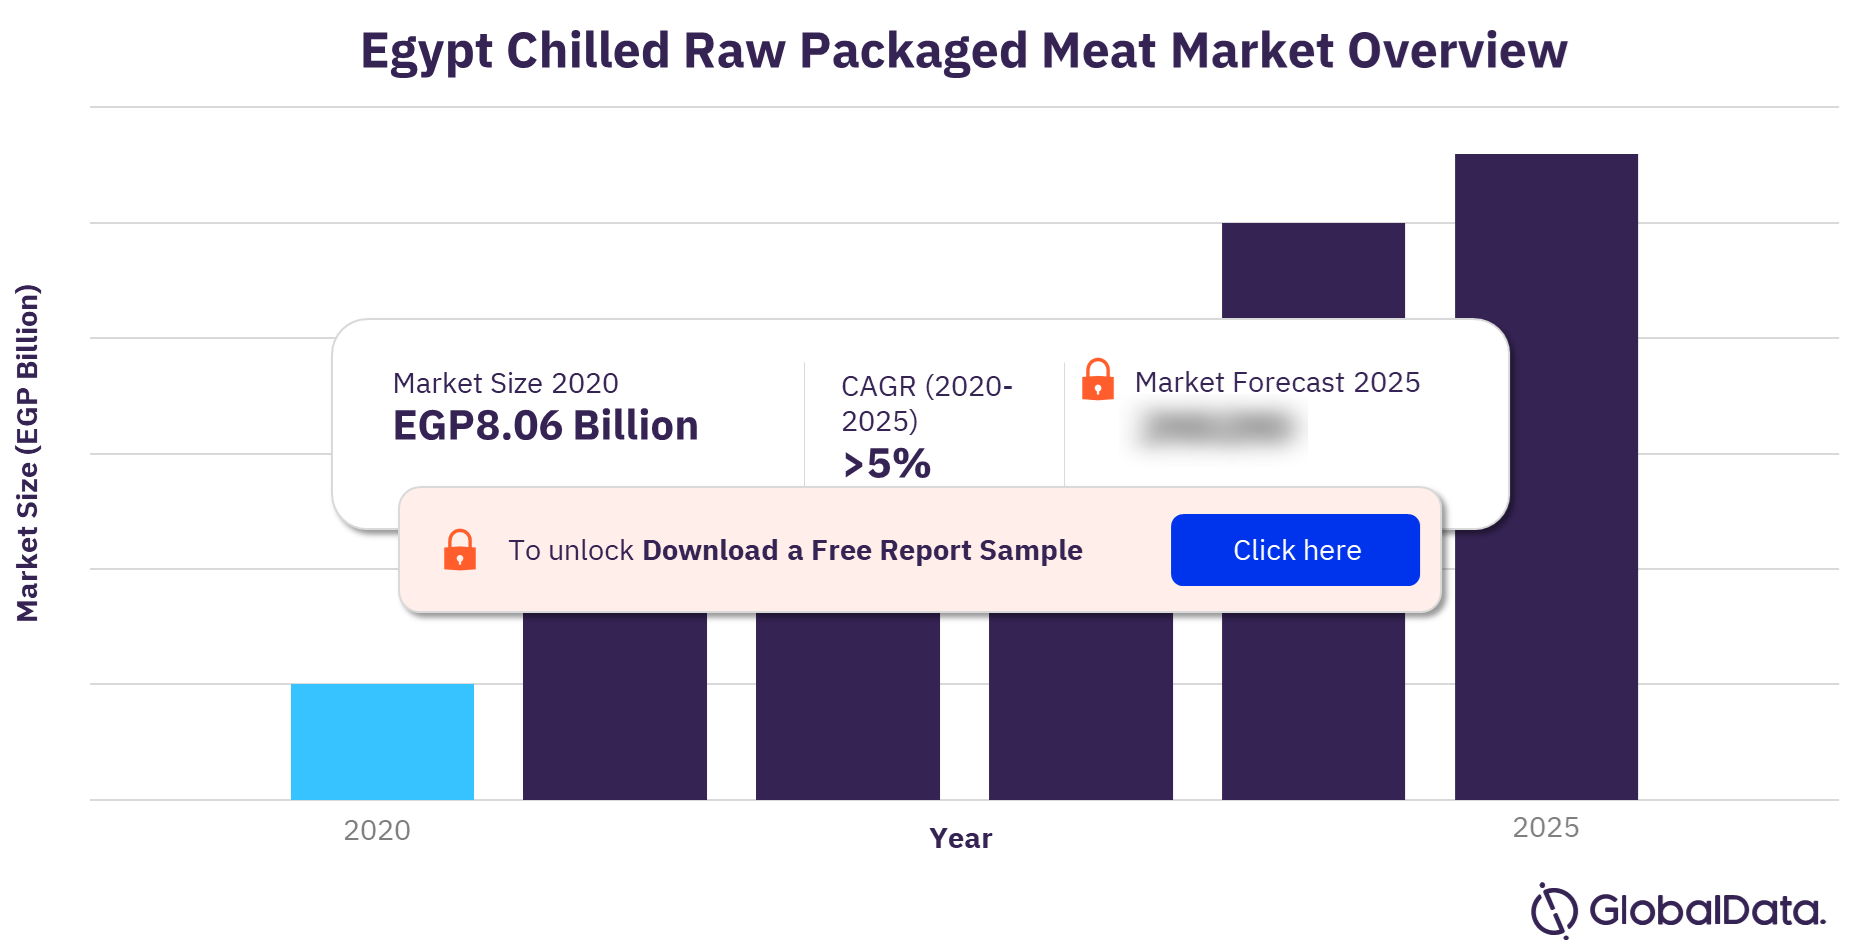 Egypt chilled raw packaged meat market outlook 